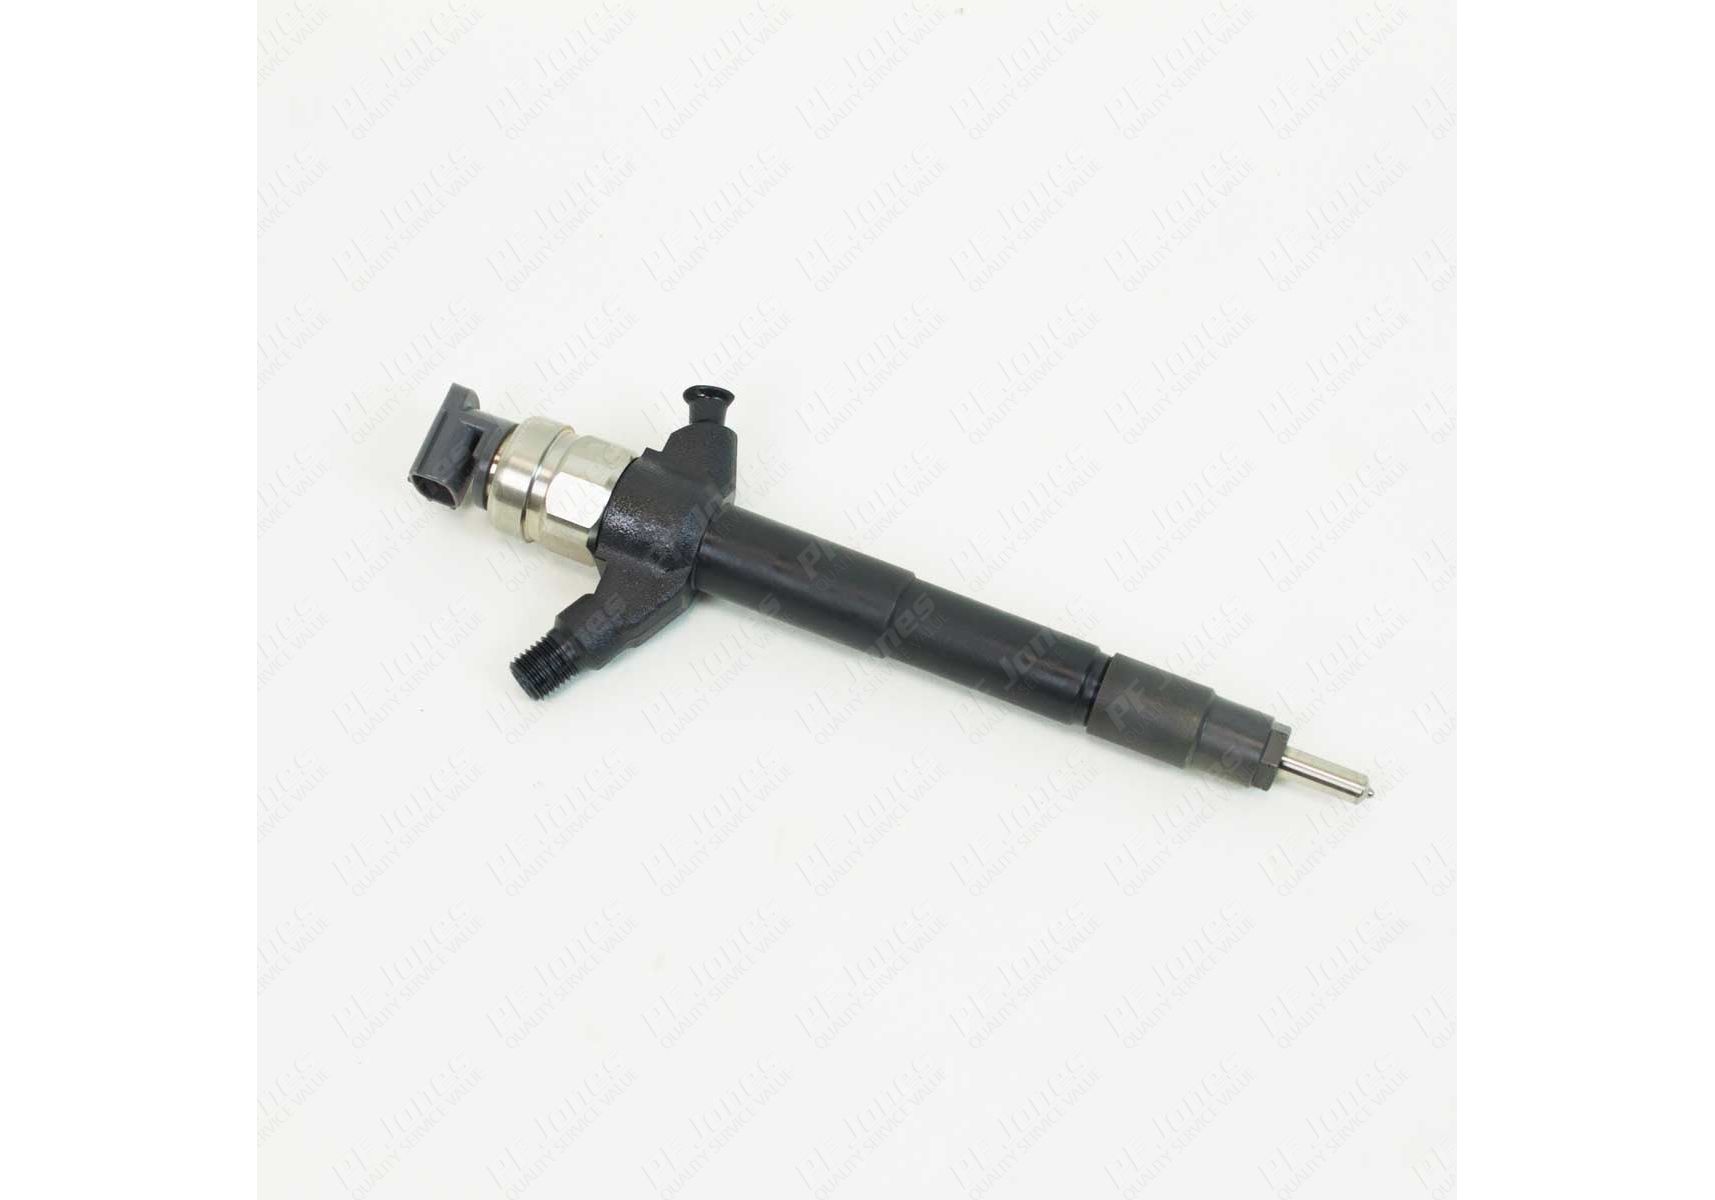 DENSO Ford TRANSIT Injecteur 2.4 2.2 TDCI Propulsion Fwd O.E DENSO Type MK7 2006 On 